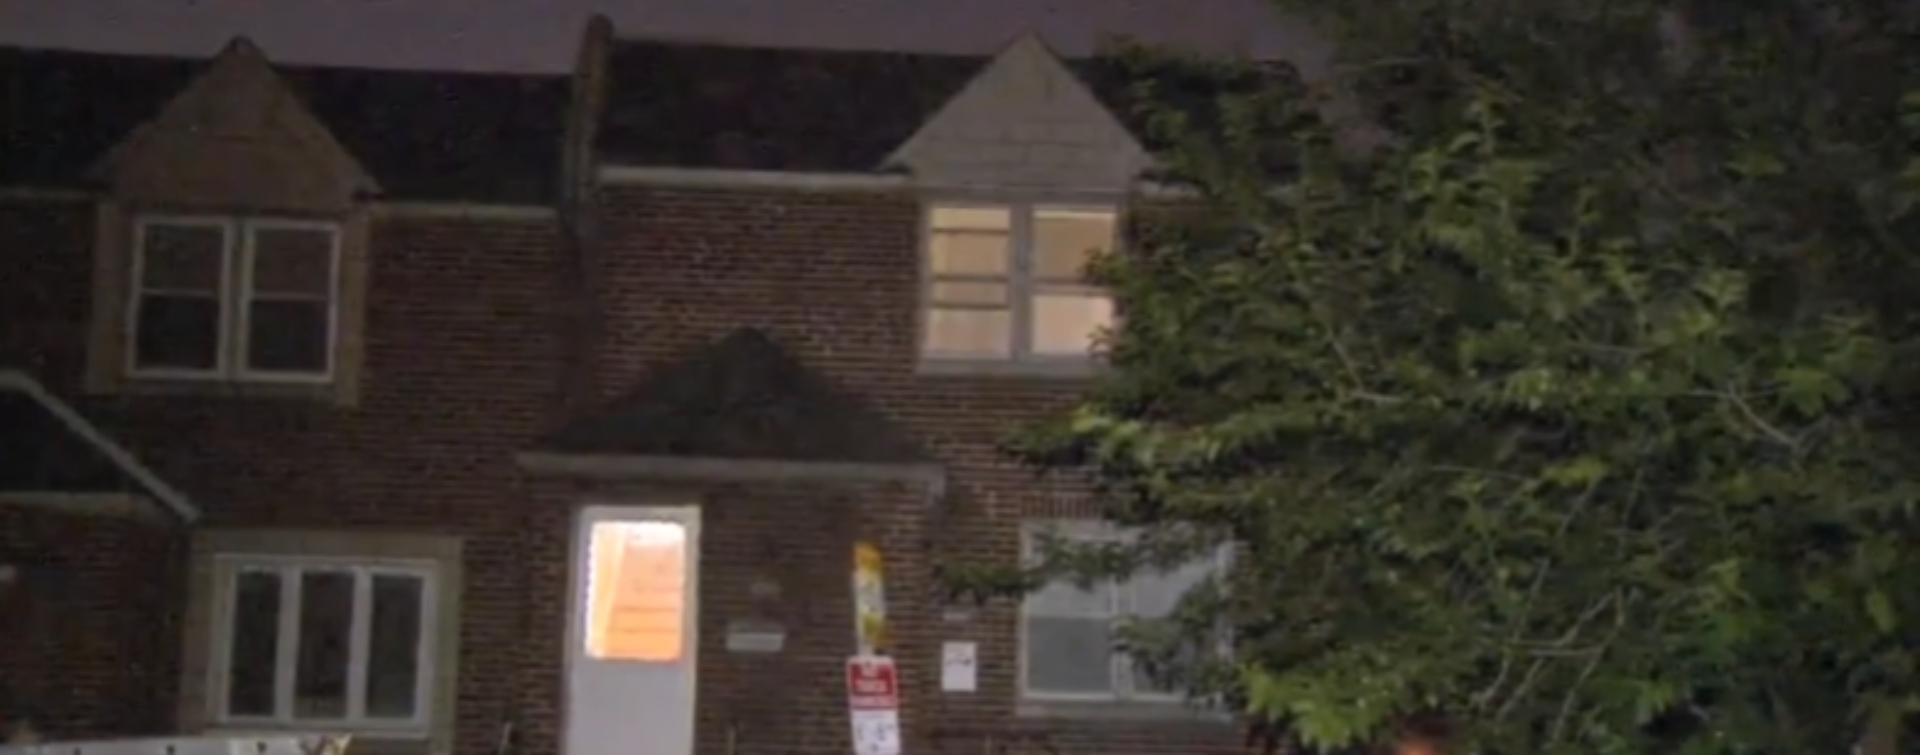 Picture of the house the teen was allegedly abducted in. [Website:Screenshot:6 ABC]